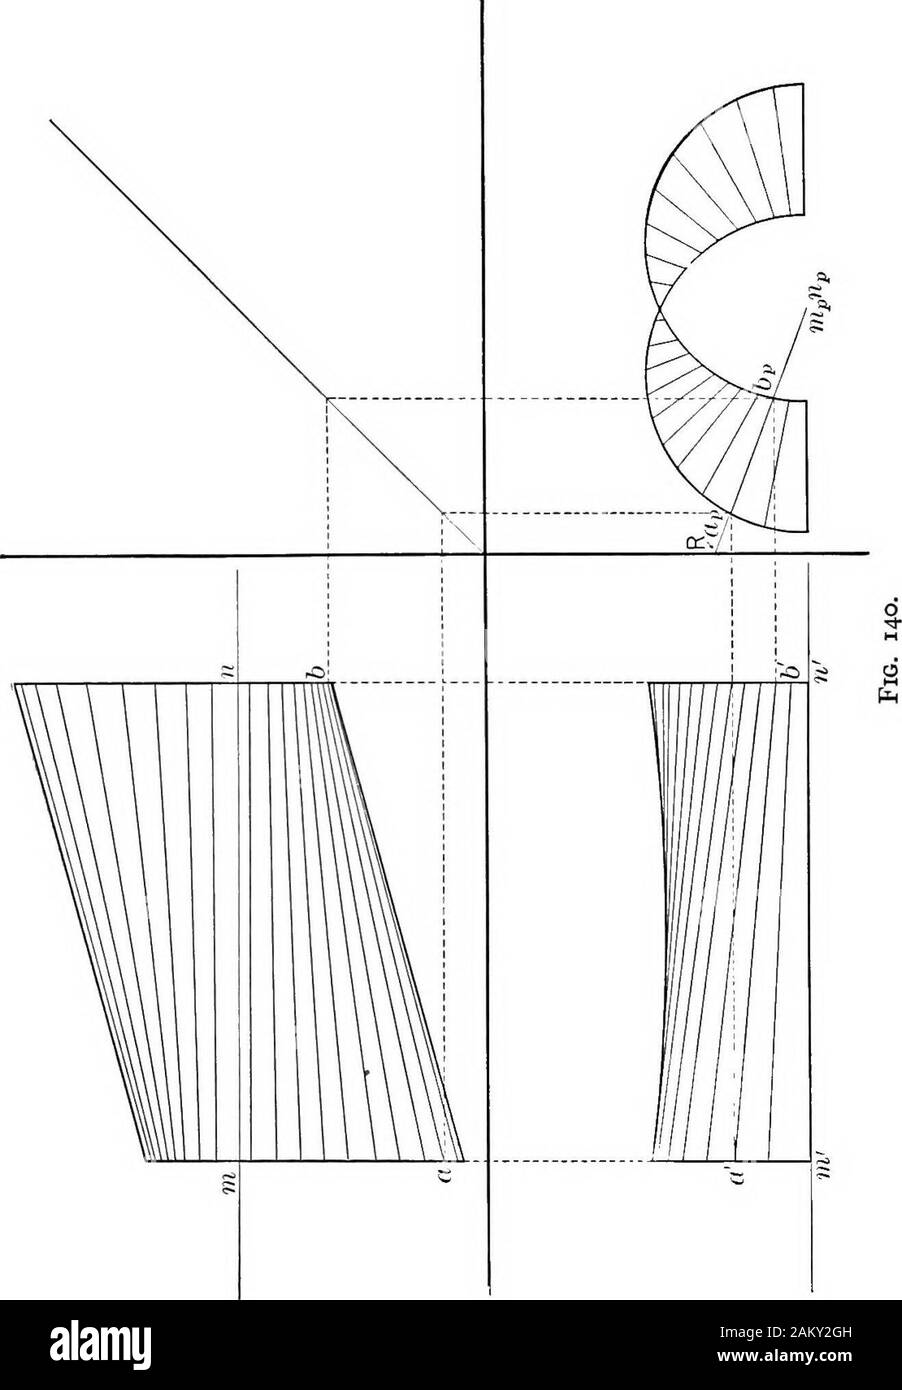 The essentials of descriptive geometry . Fig. 139. 174 ESSENTIALS OF DESCRIPTIVE GEOMETRY. WARPED SURFACES I7S 141. Proposition 44. To develop a warped surface.Discussion. While warped surfaces may not be truly devel-oped, patterns for some warped surfaces may be laid out which, a  im »)&gt;^ &gt;^ ?   0 ll ^ J/ p Fig. 141. when formed, approximate the original surface closely enoughfor commercial purposes. An example of this is shown in thedevelopment of the warped cone in Fig. 142. 176 ESSENTIALS OF DESCRIPTIVE GEOMETRY Stock Photo